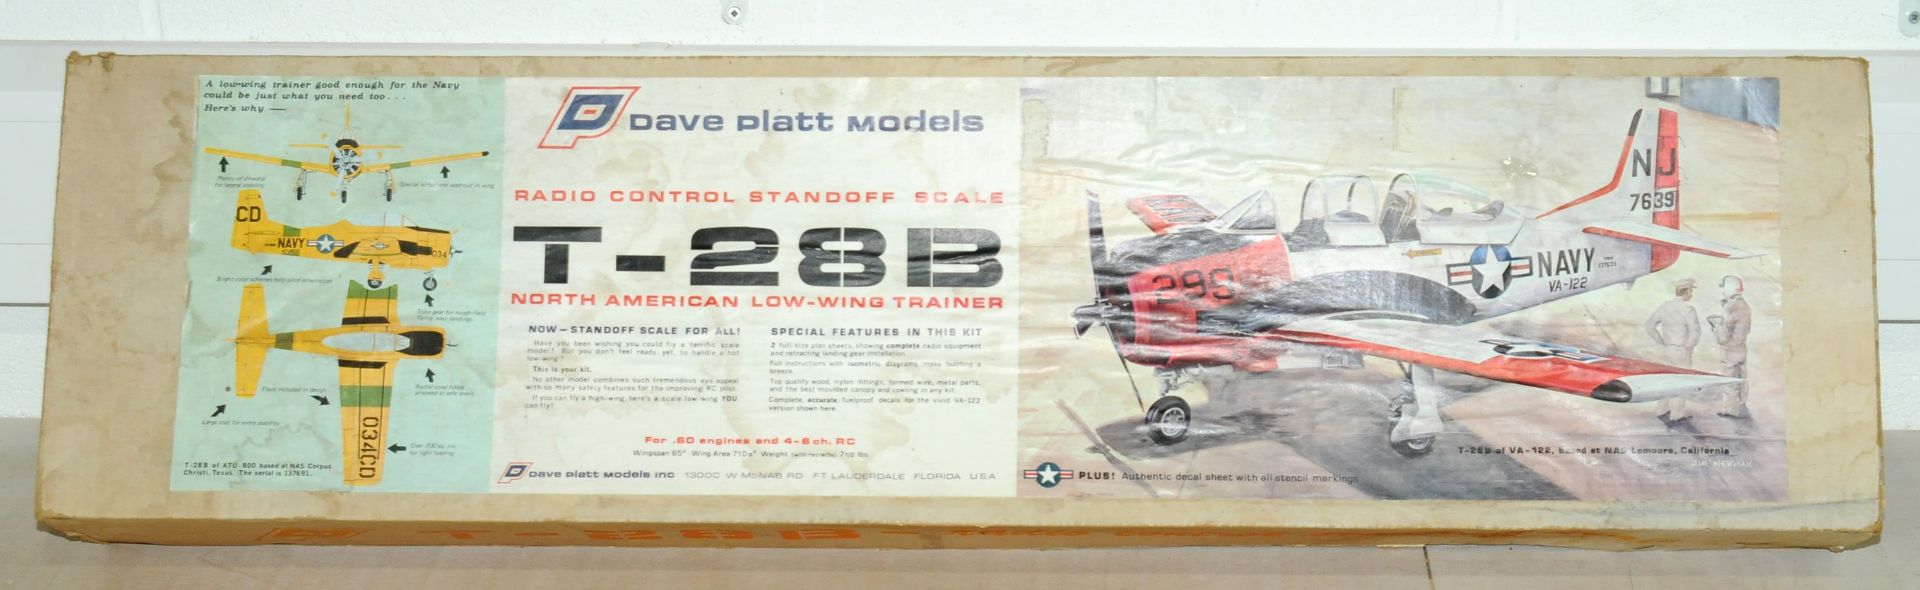 Dave Platt Models a boxed T-28B North American Low-wing Trainer Plane Kit